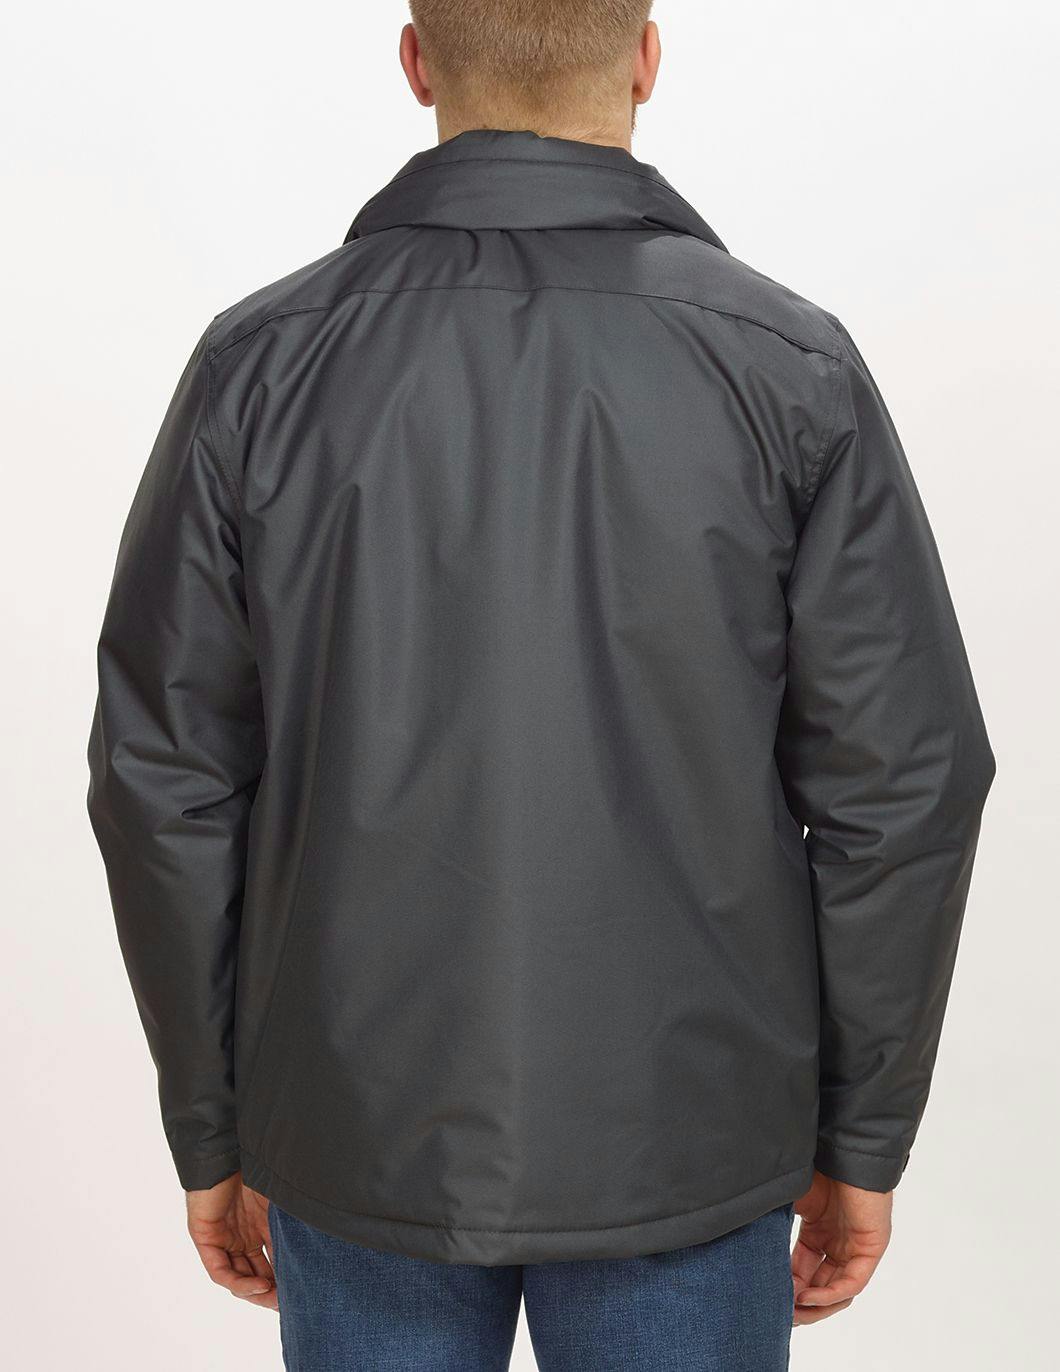 Landway-Mens-Expedition-Insulated-Jacket-Back